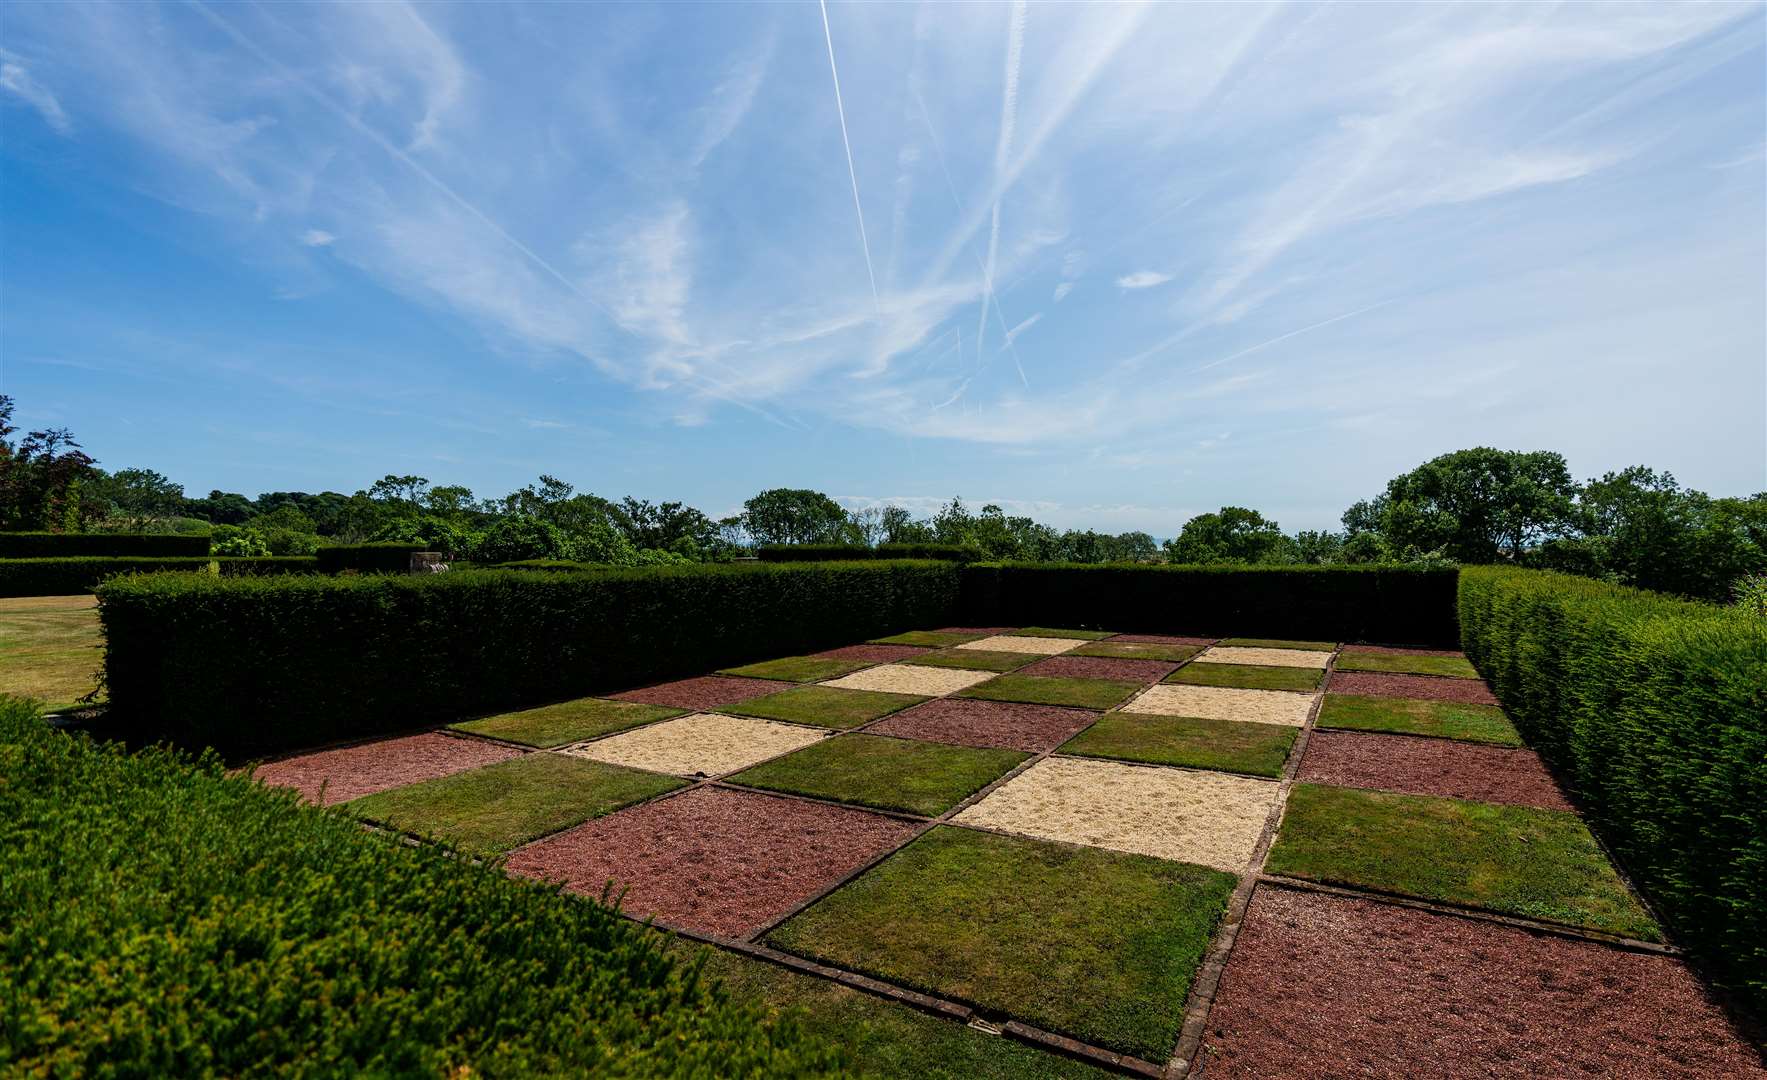 The tour includes the eye-catching checkerboard garden. Picture: Aspinall Foundation